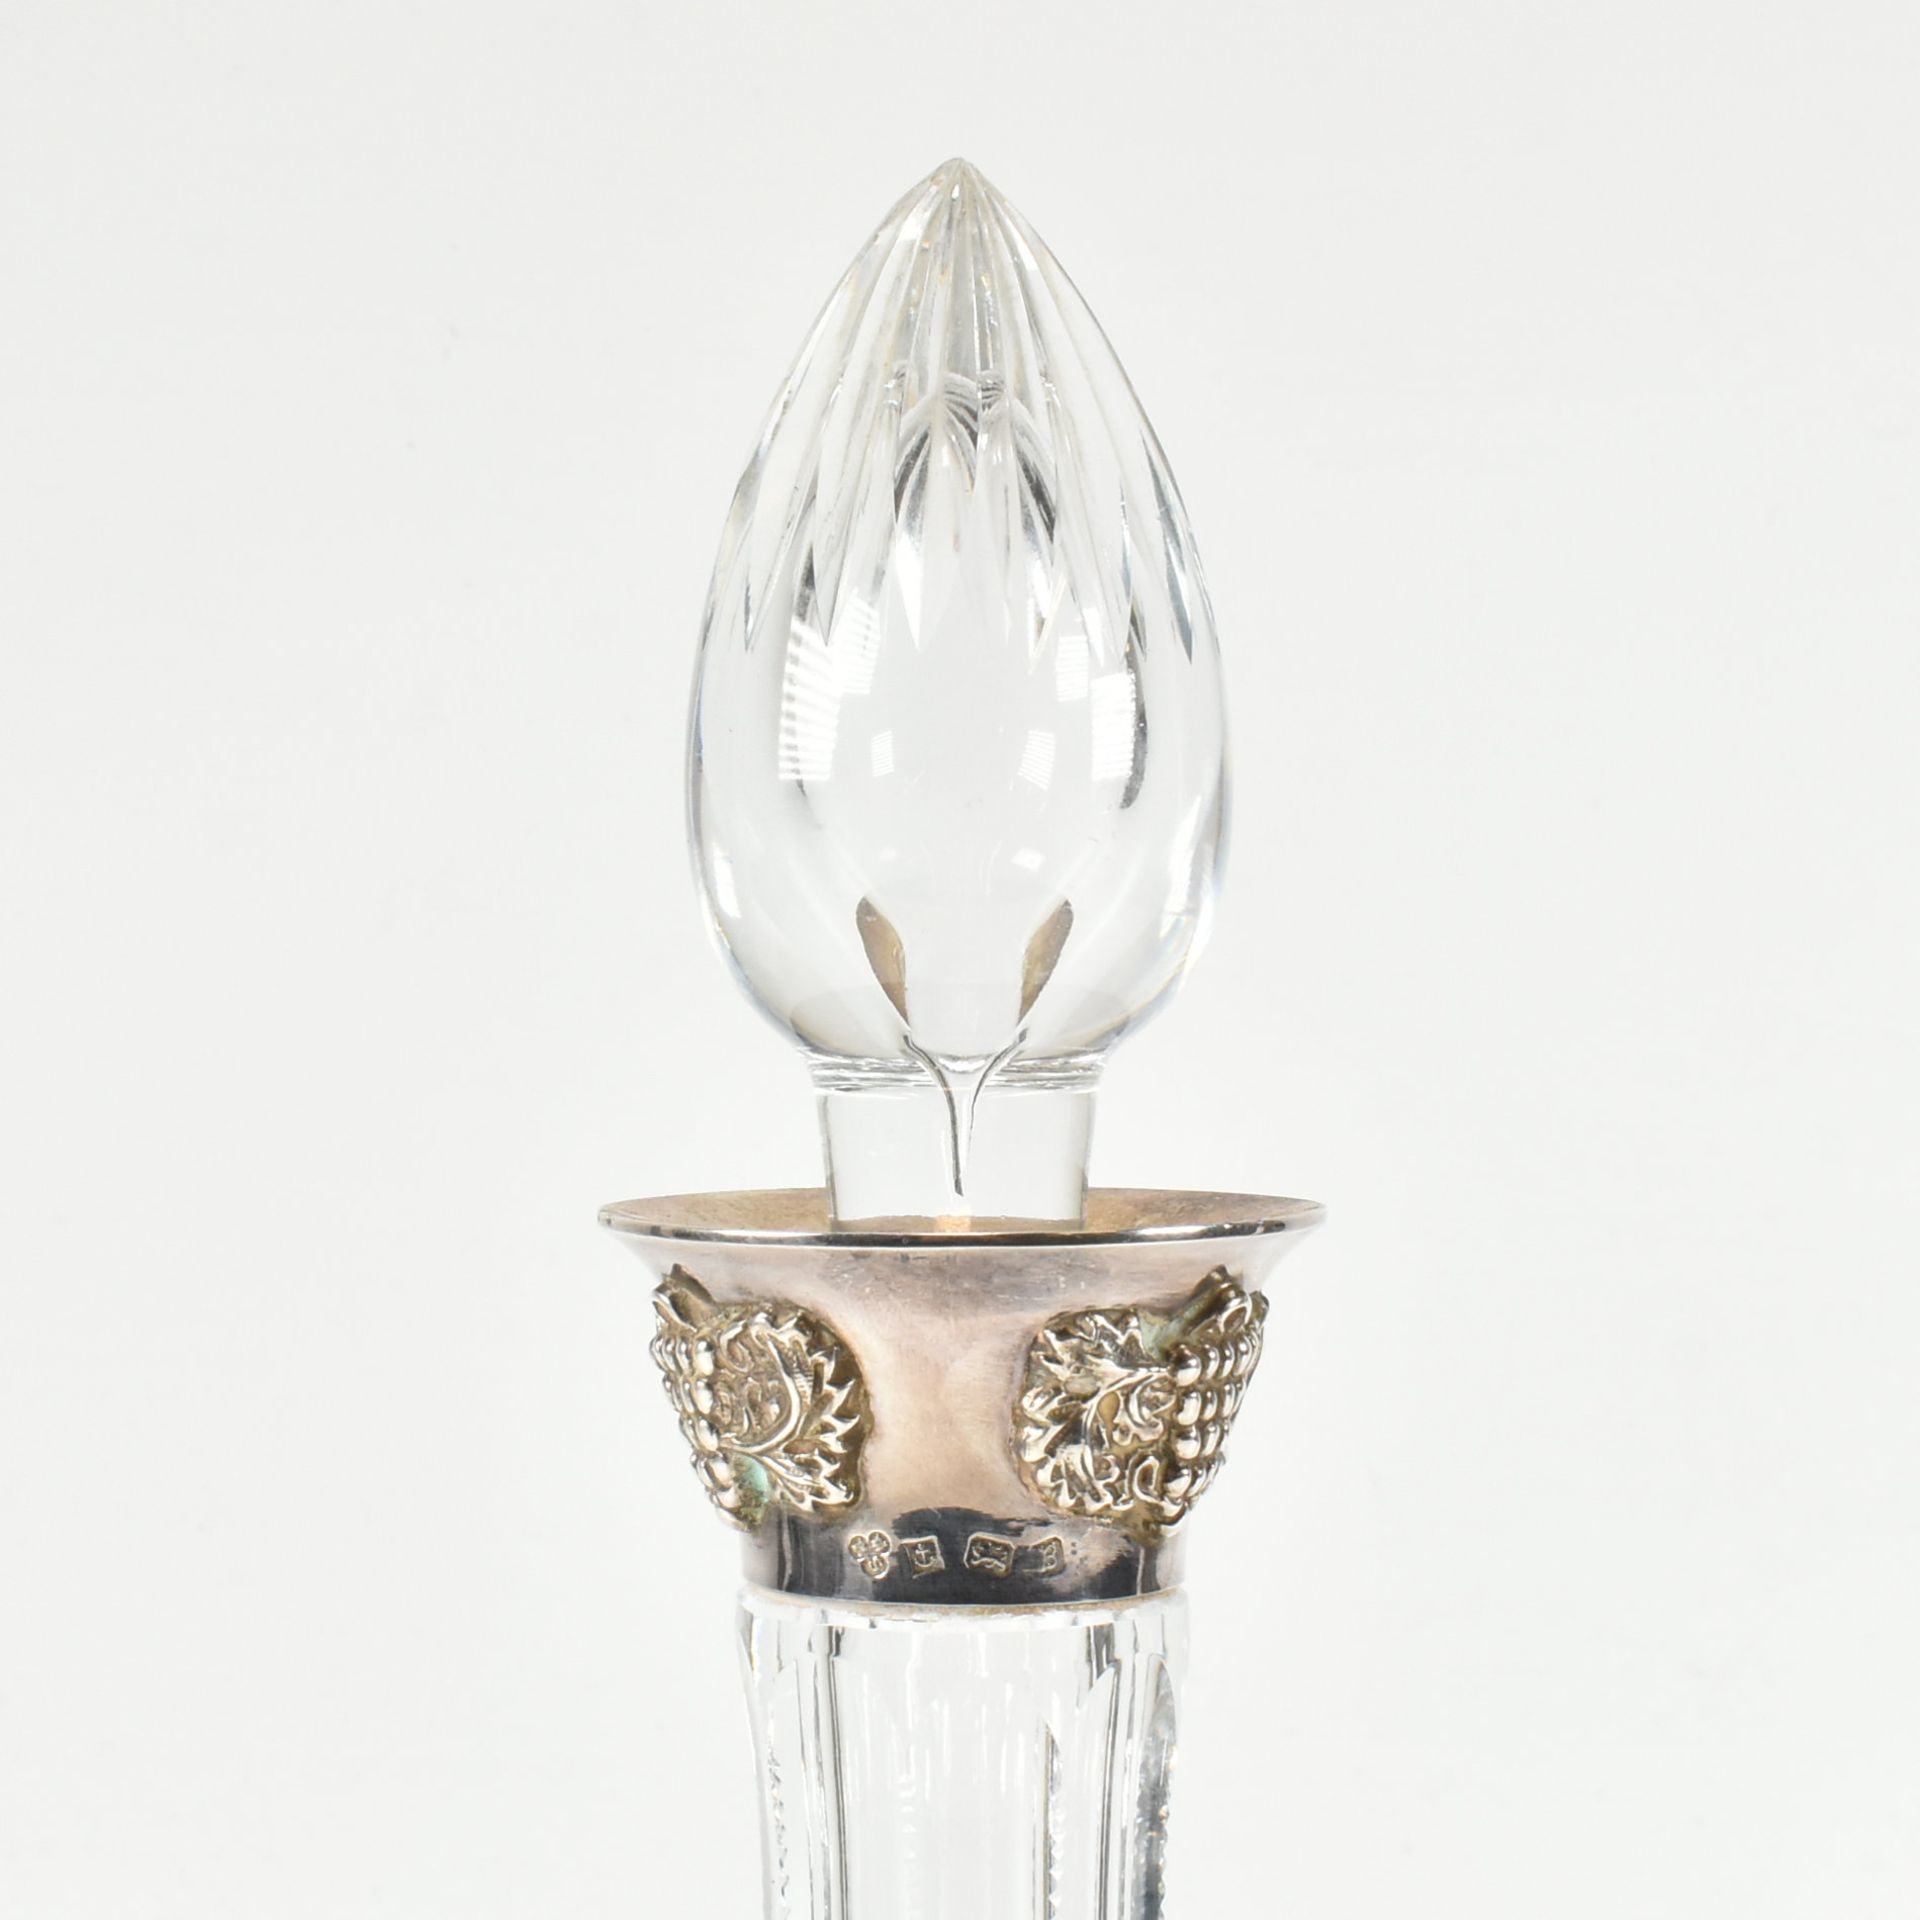 1970S HALLMARKED SILVER MOUNTED CUT GLASS DECANTER - Image 4 of 7